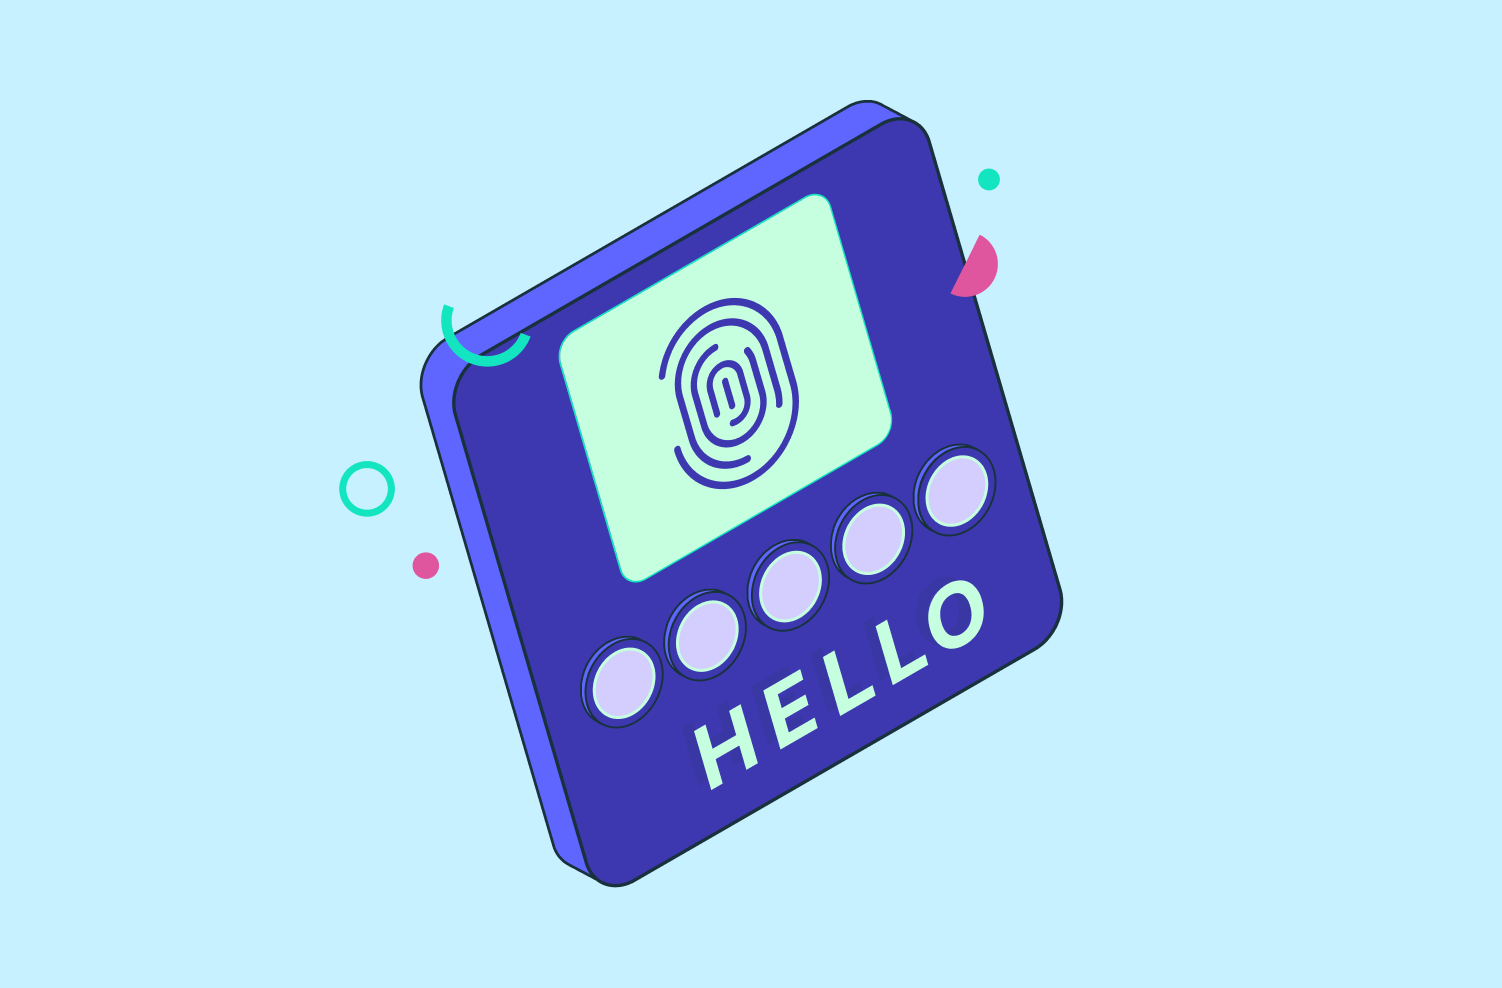 An icon representing a biometric authentication factor with a thumbprint on it. 